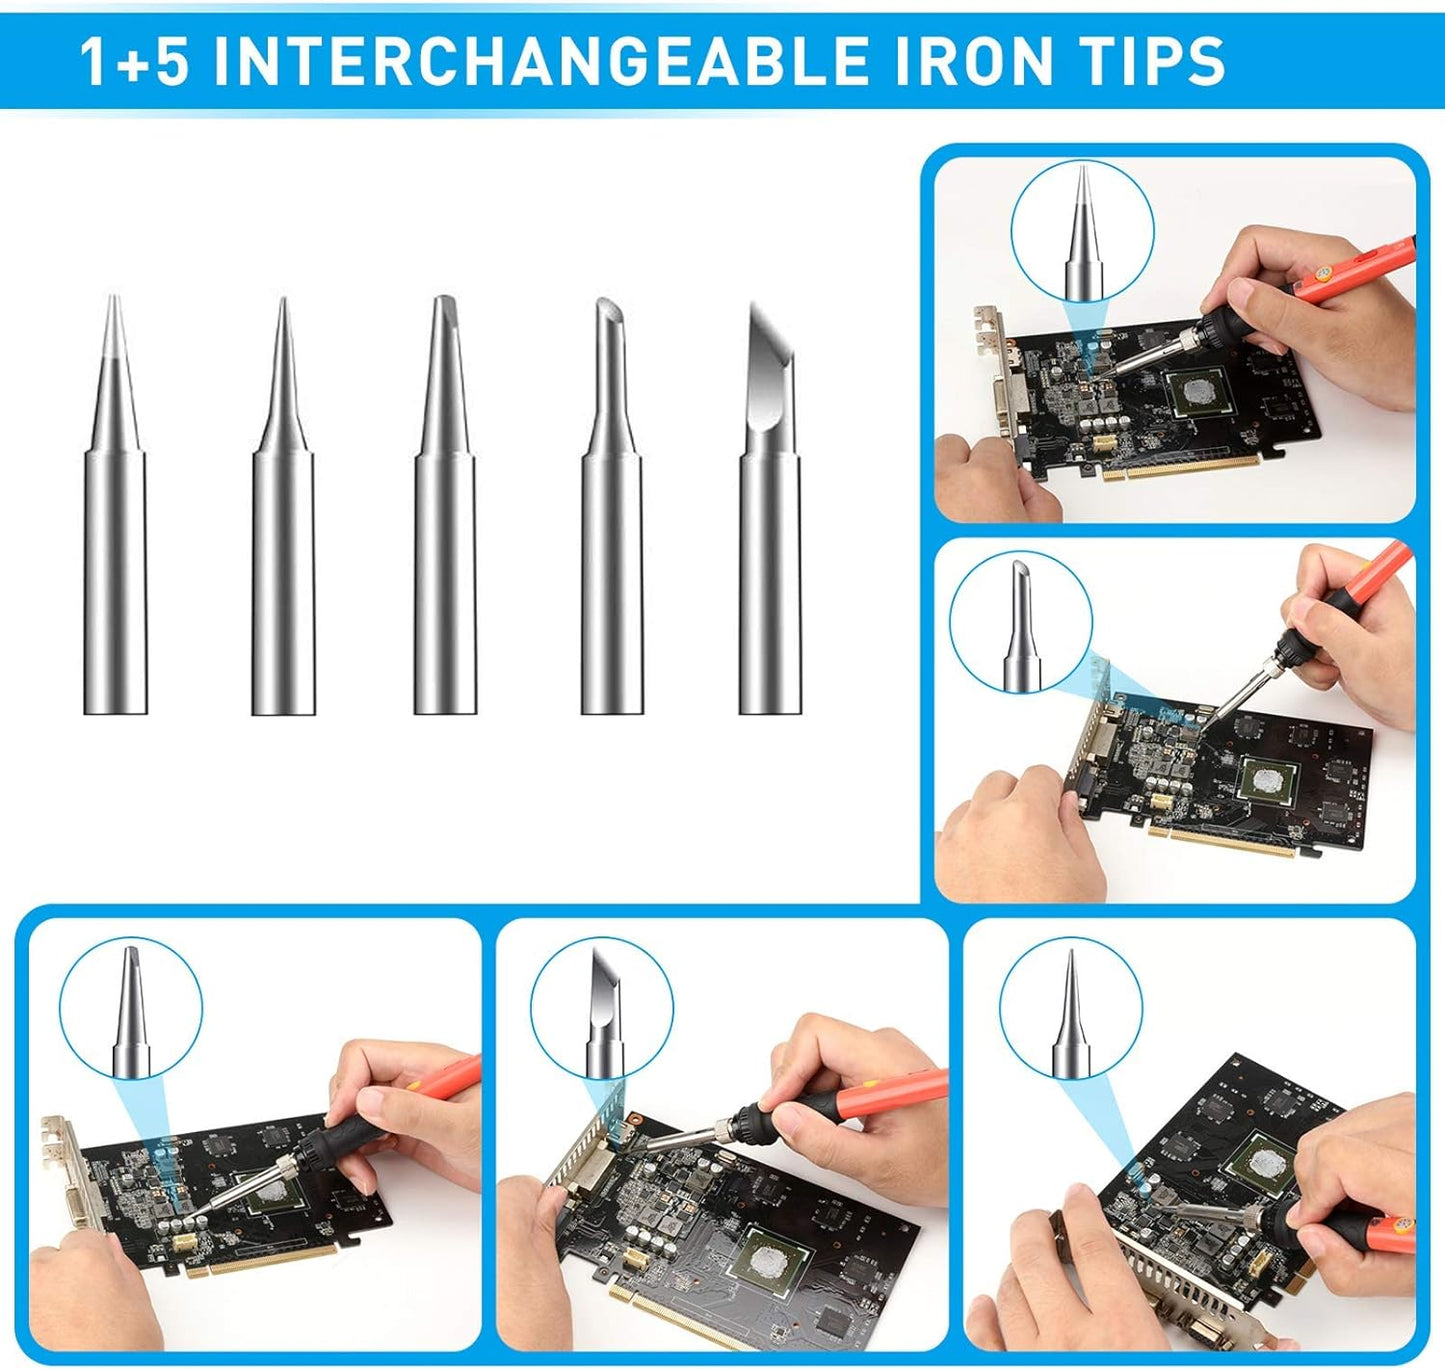 60W temperature soldering iron kit with iron tips 110V, 5-in-1